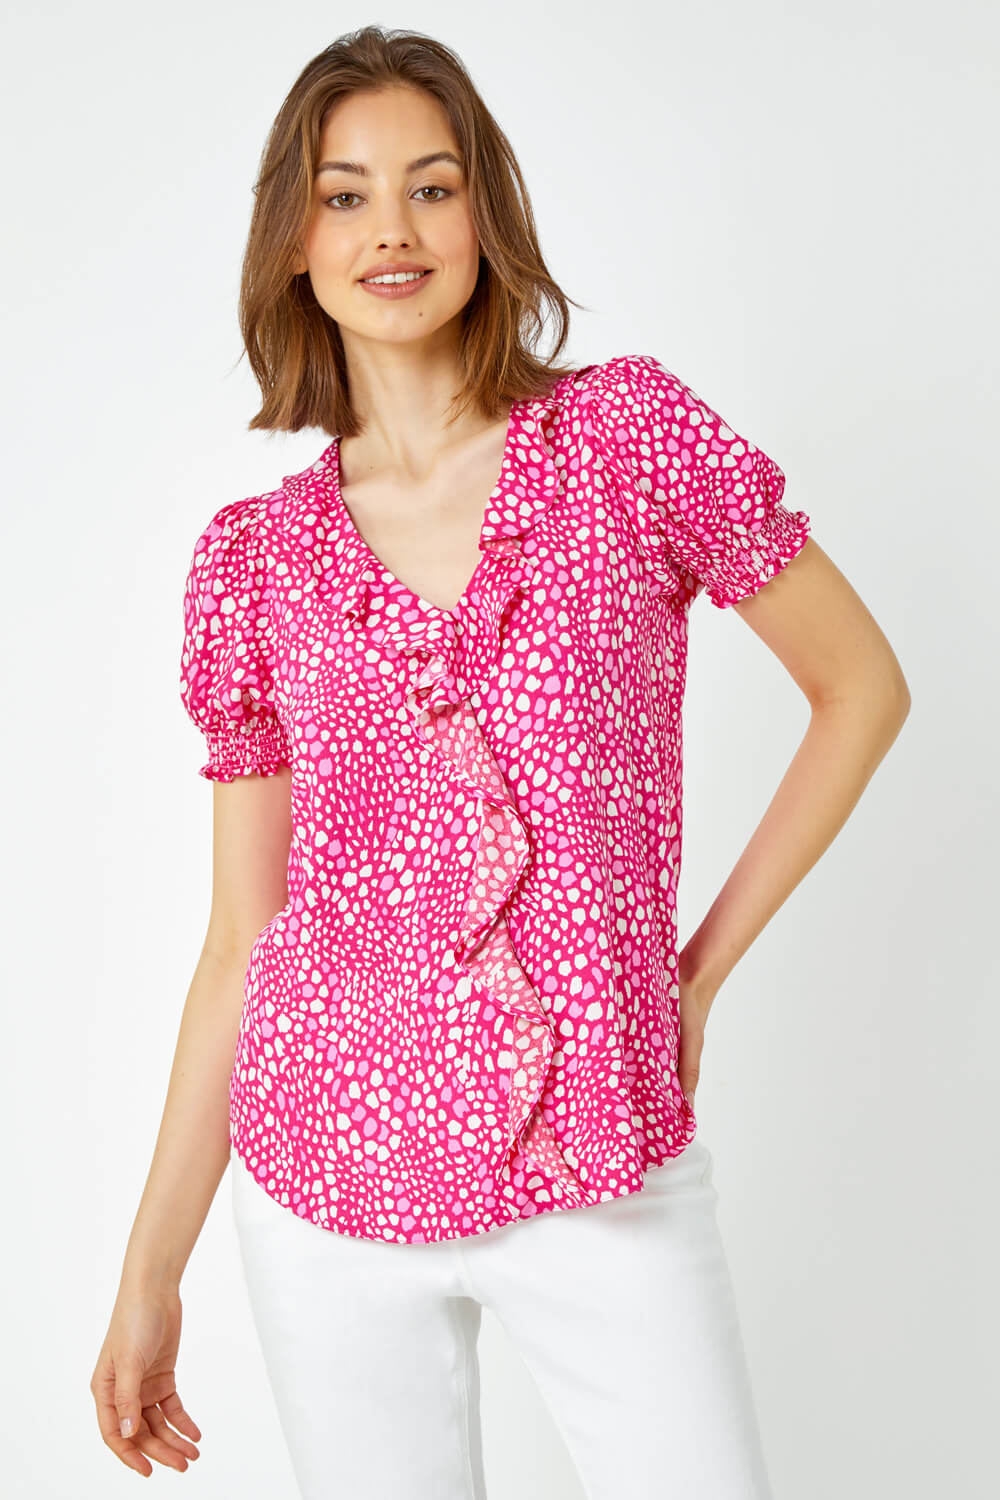 PINK Pebble Print Ruffle Front Blouse, Image 4 of 5